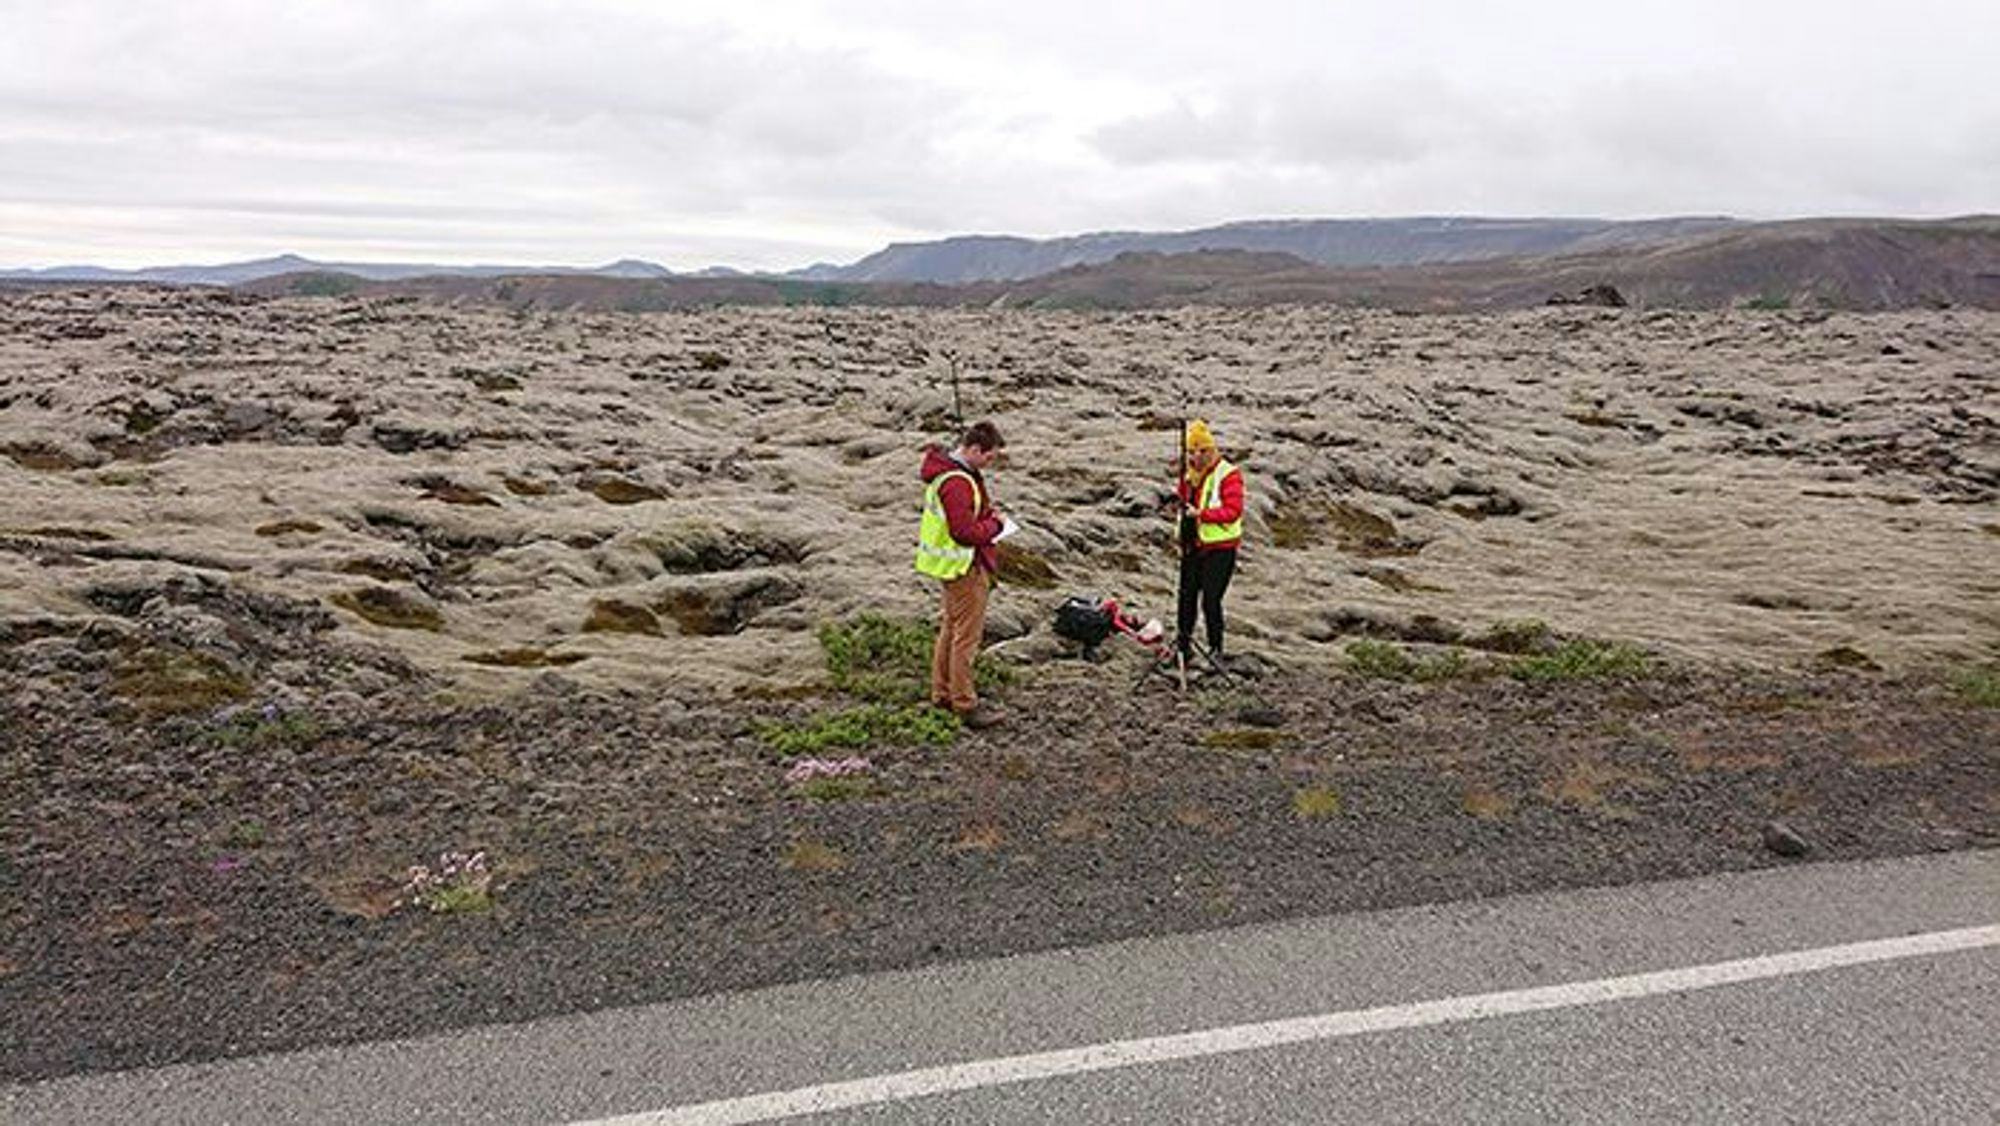 Two individuals in visibility vest by a roadside in a barren landscape